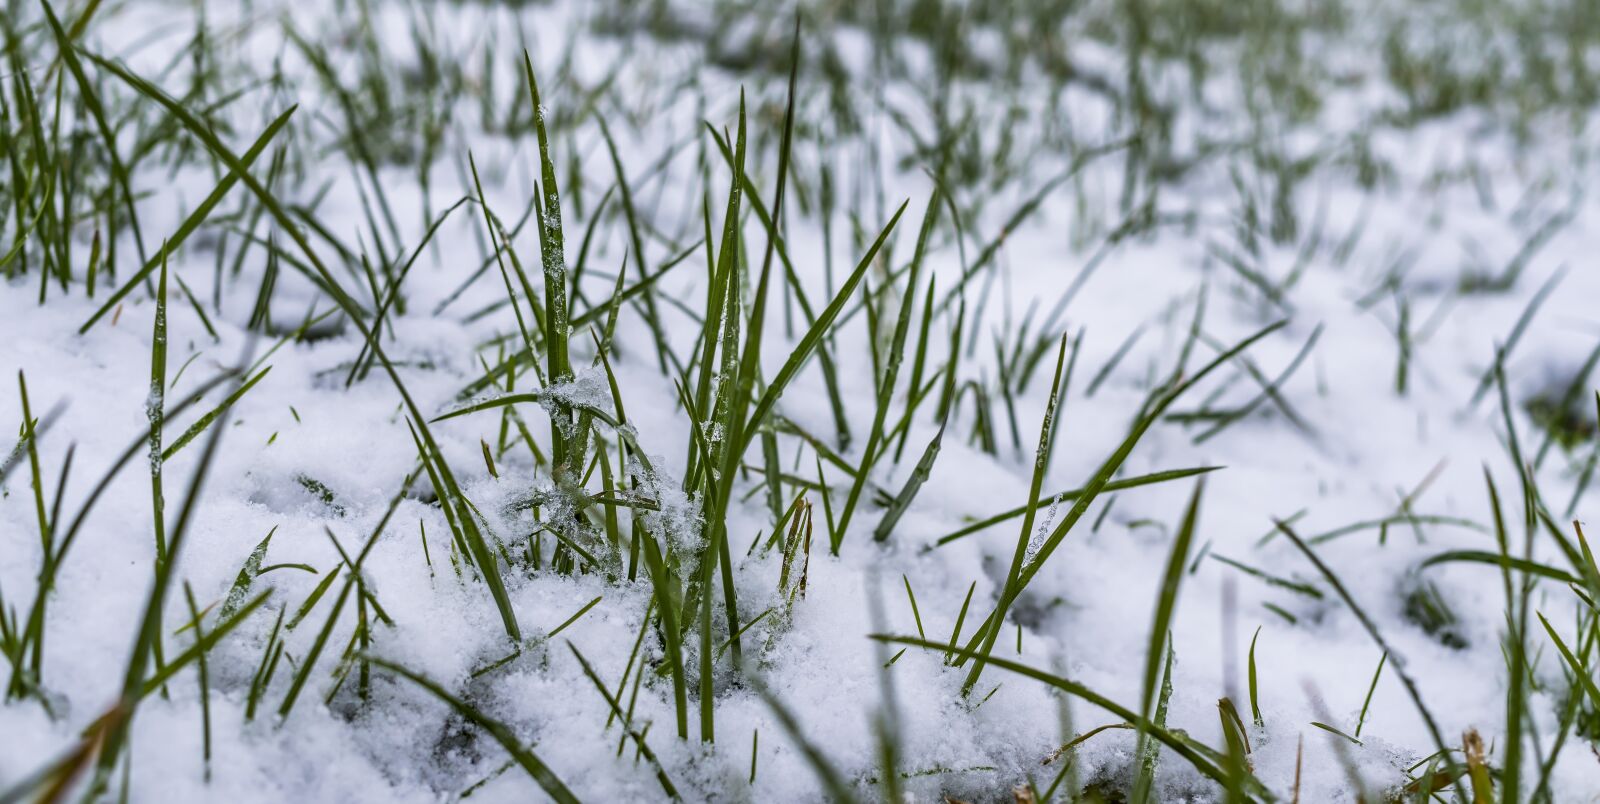 Sony a6300 sample photo. Grass, winter, snow photography